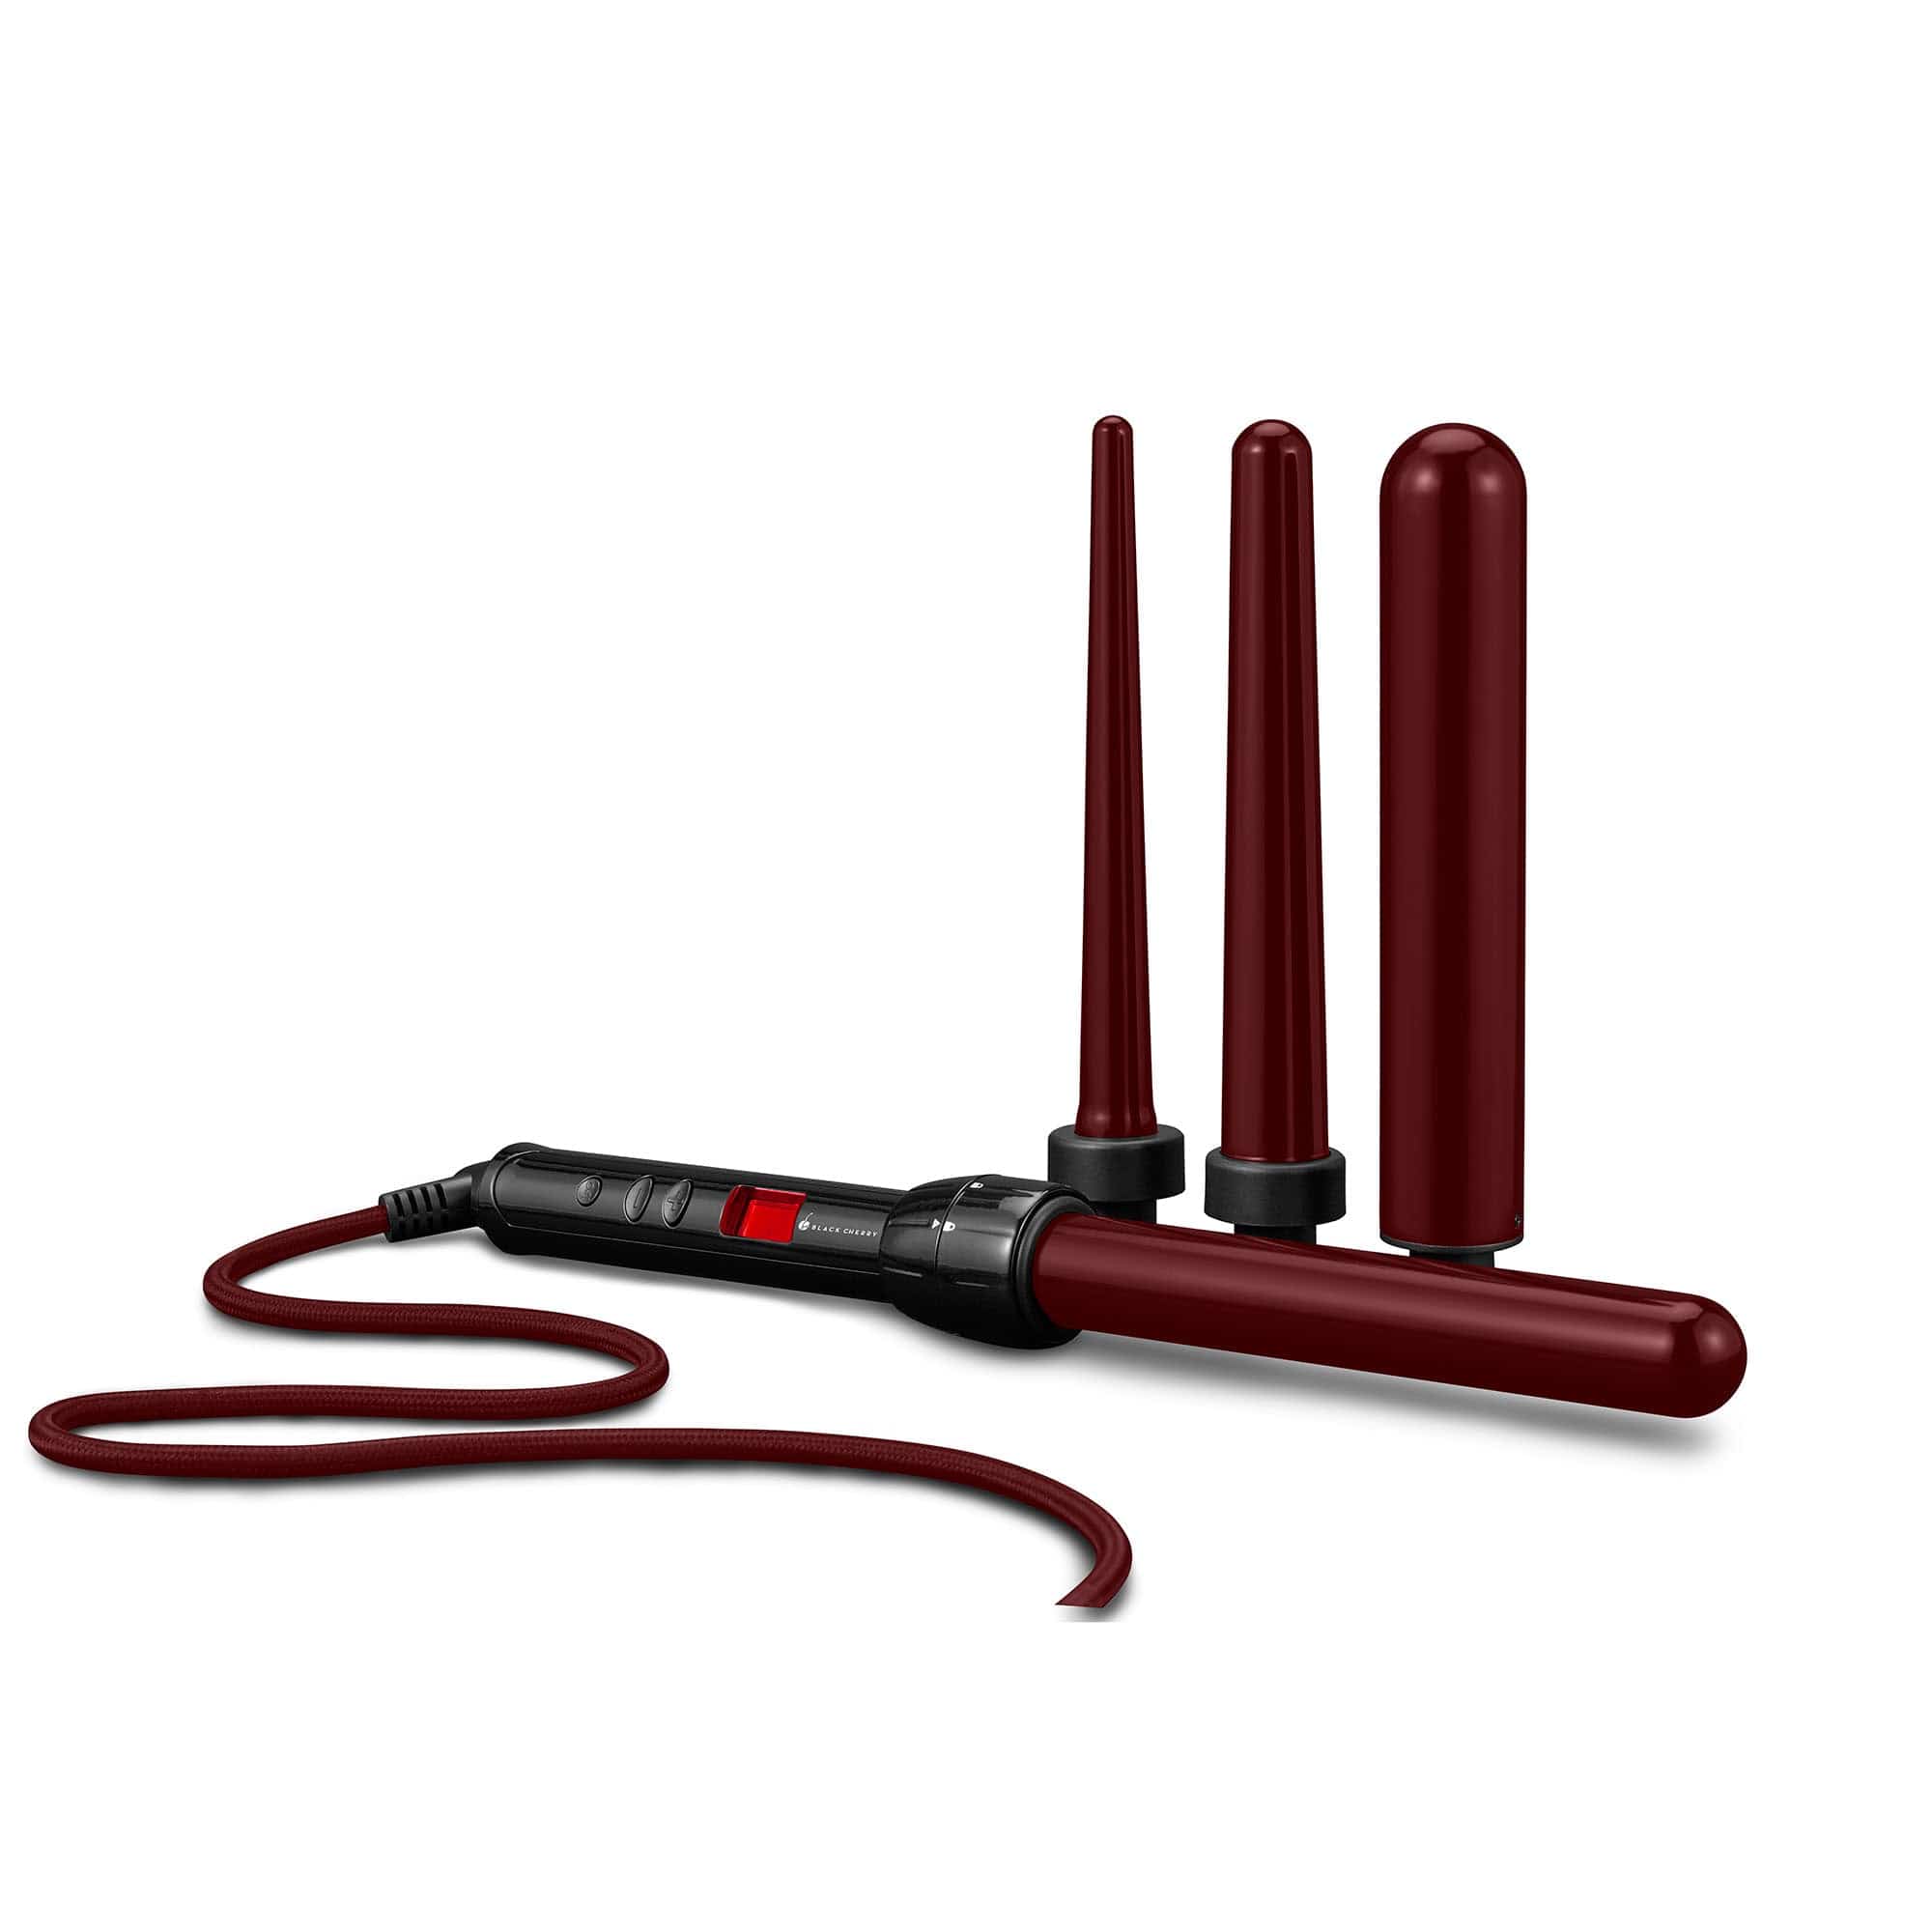 Cortex Beauty 4-IN-1 Curling Wand Set with Thermolon Plates